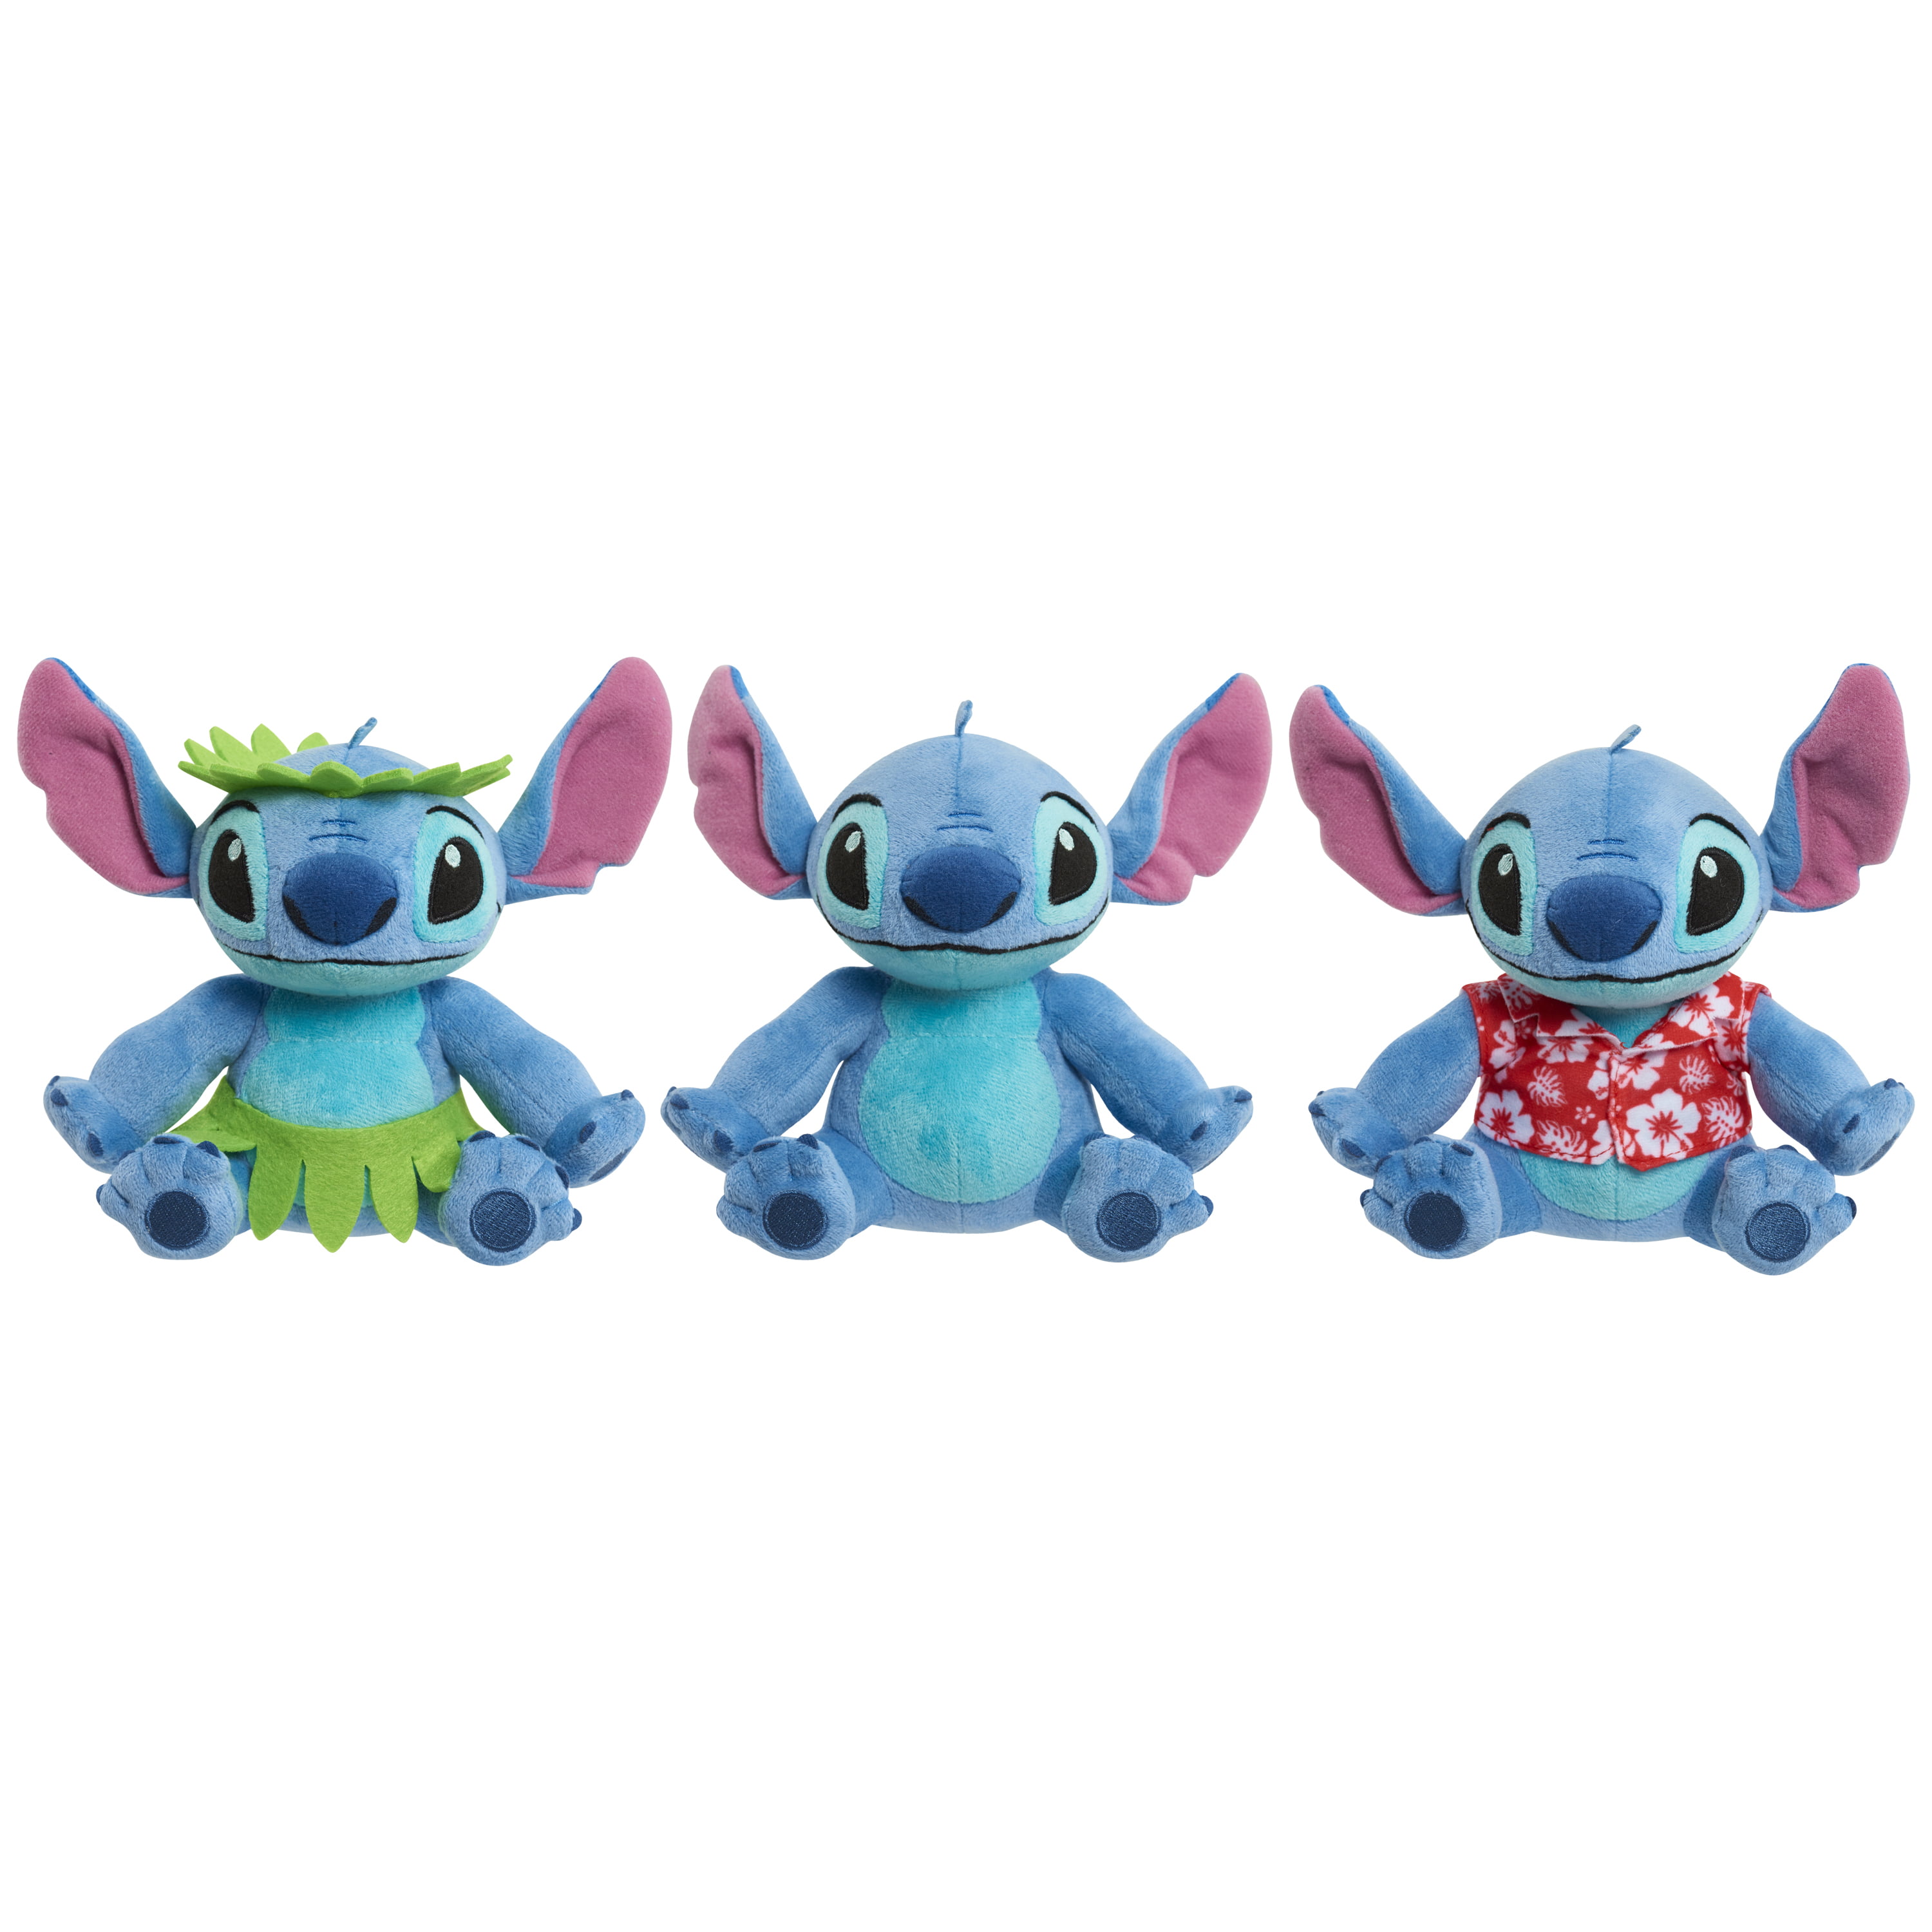 Stitch plush Stitch toy gift ooak kawaii plush furry animal Hero from the cartoon Stitch  Monsters fairy tale Collectible Artist Toys